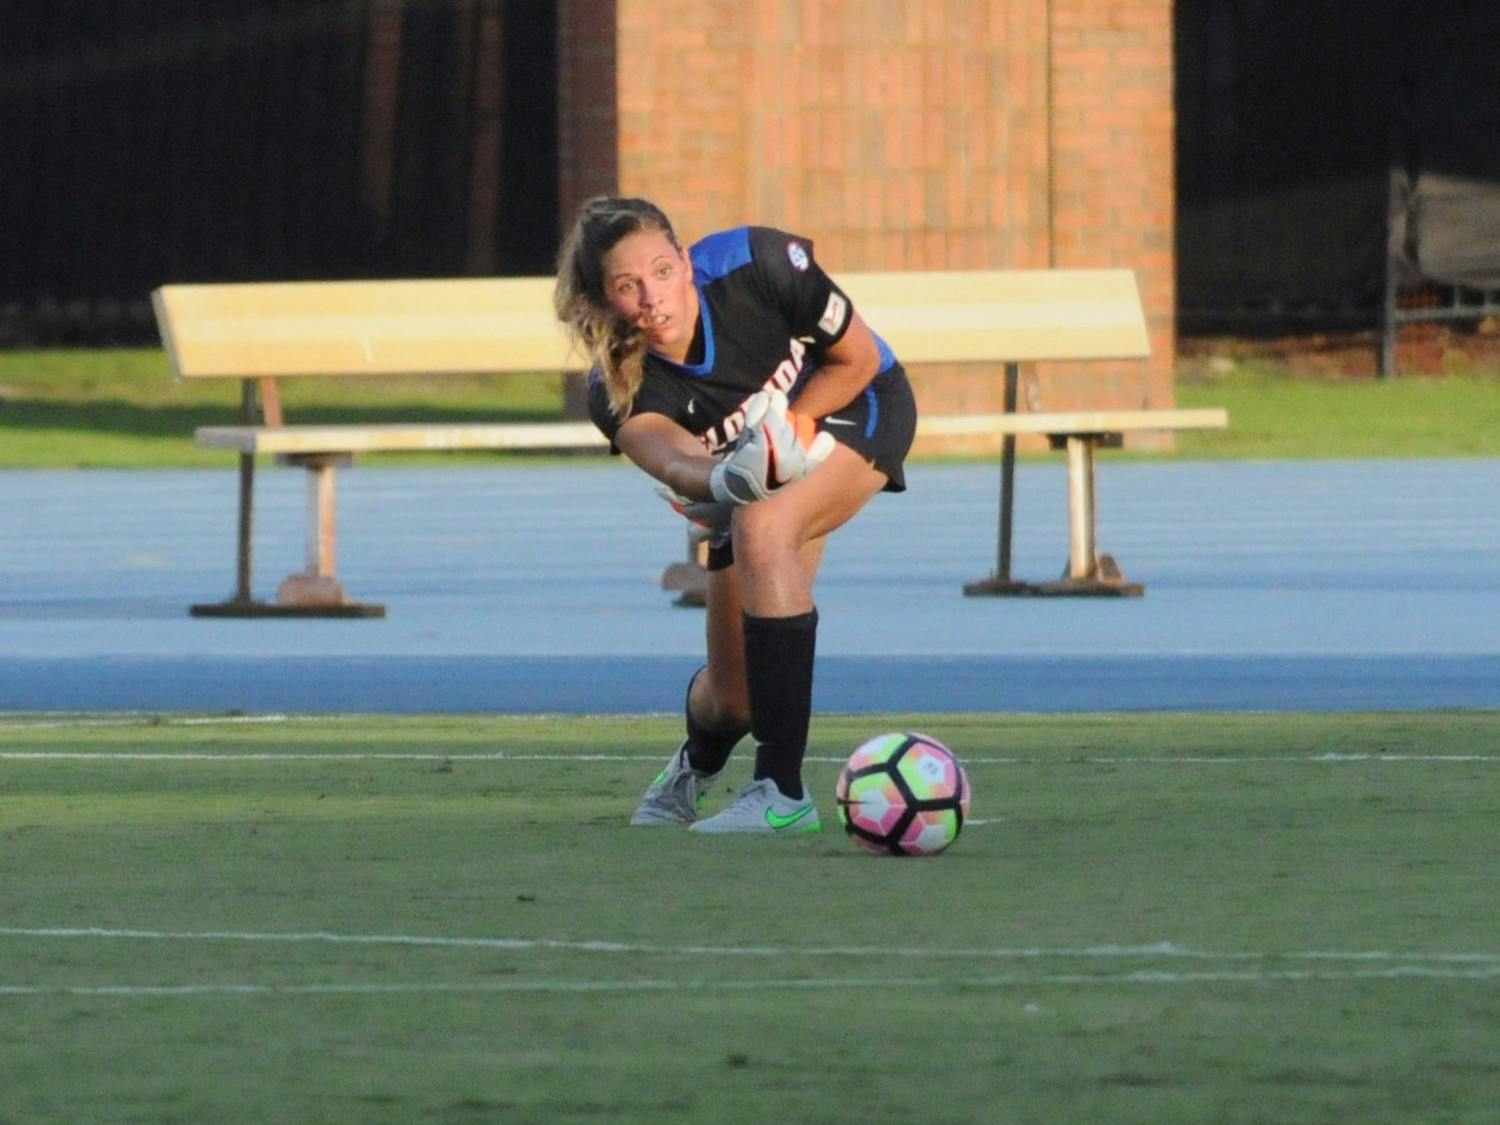 UF goalkeeper Kaylan Marckese throws the ball back into play during the first half of Florida's 5-2 win against Iowa State on Aug. 19, 2016, at James G. Pressly Stadium.